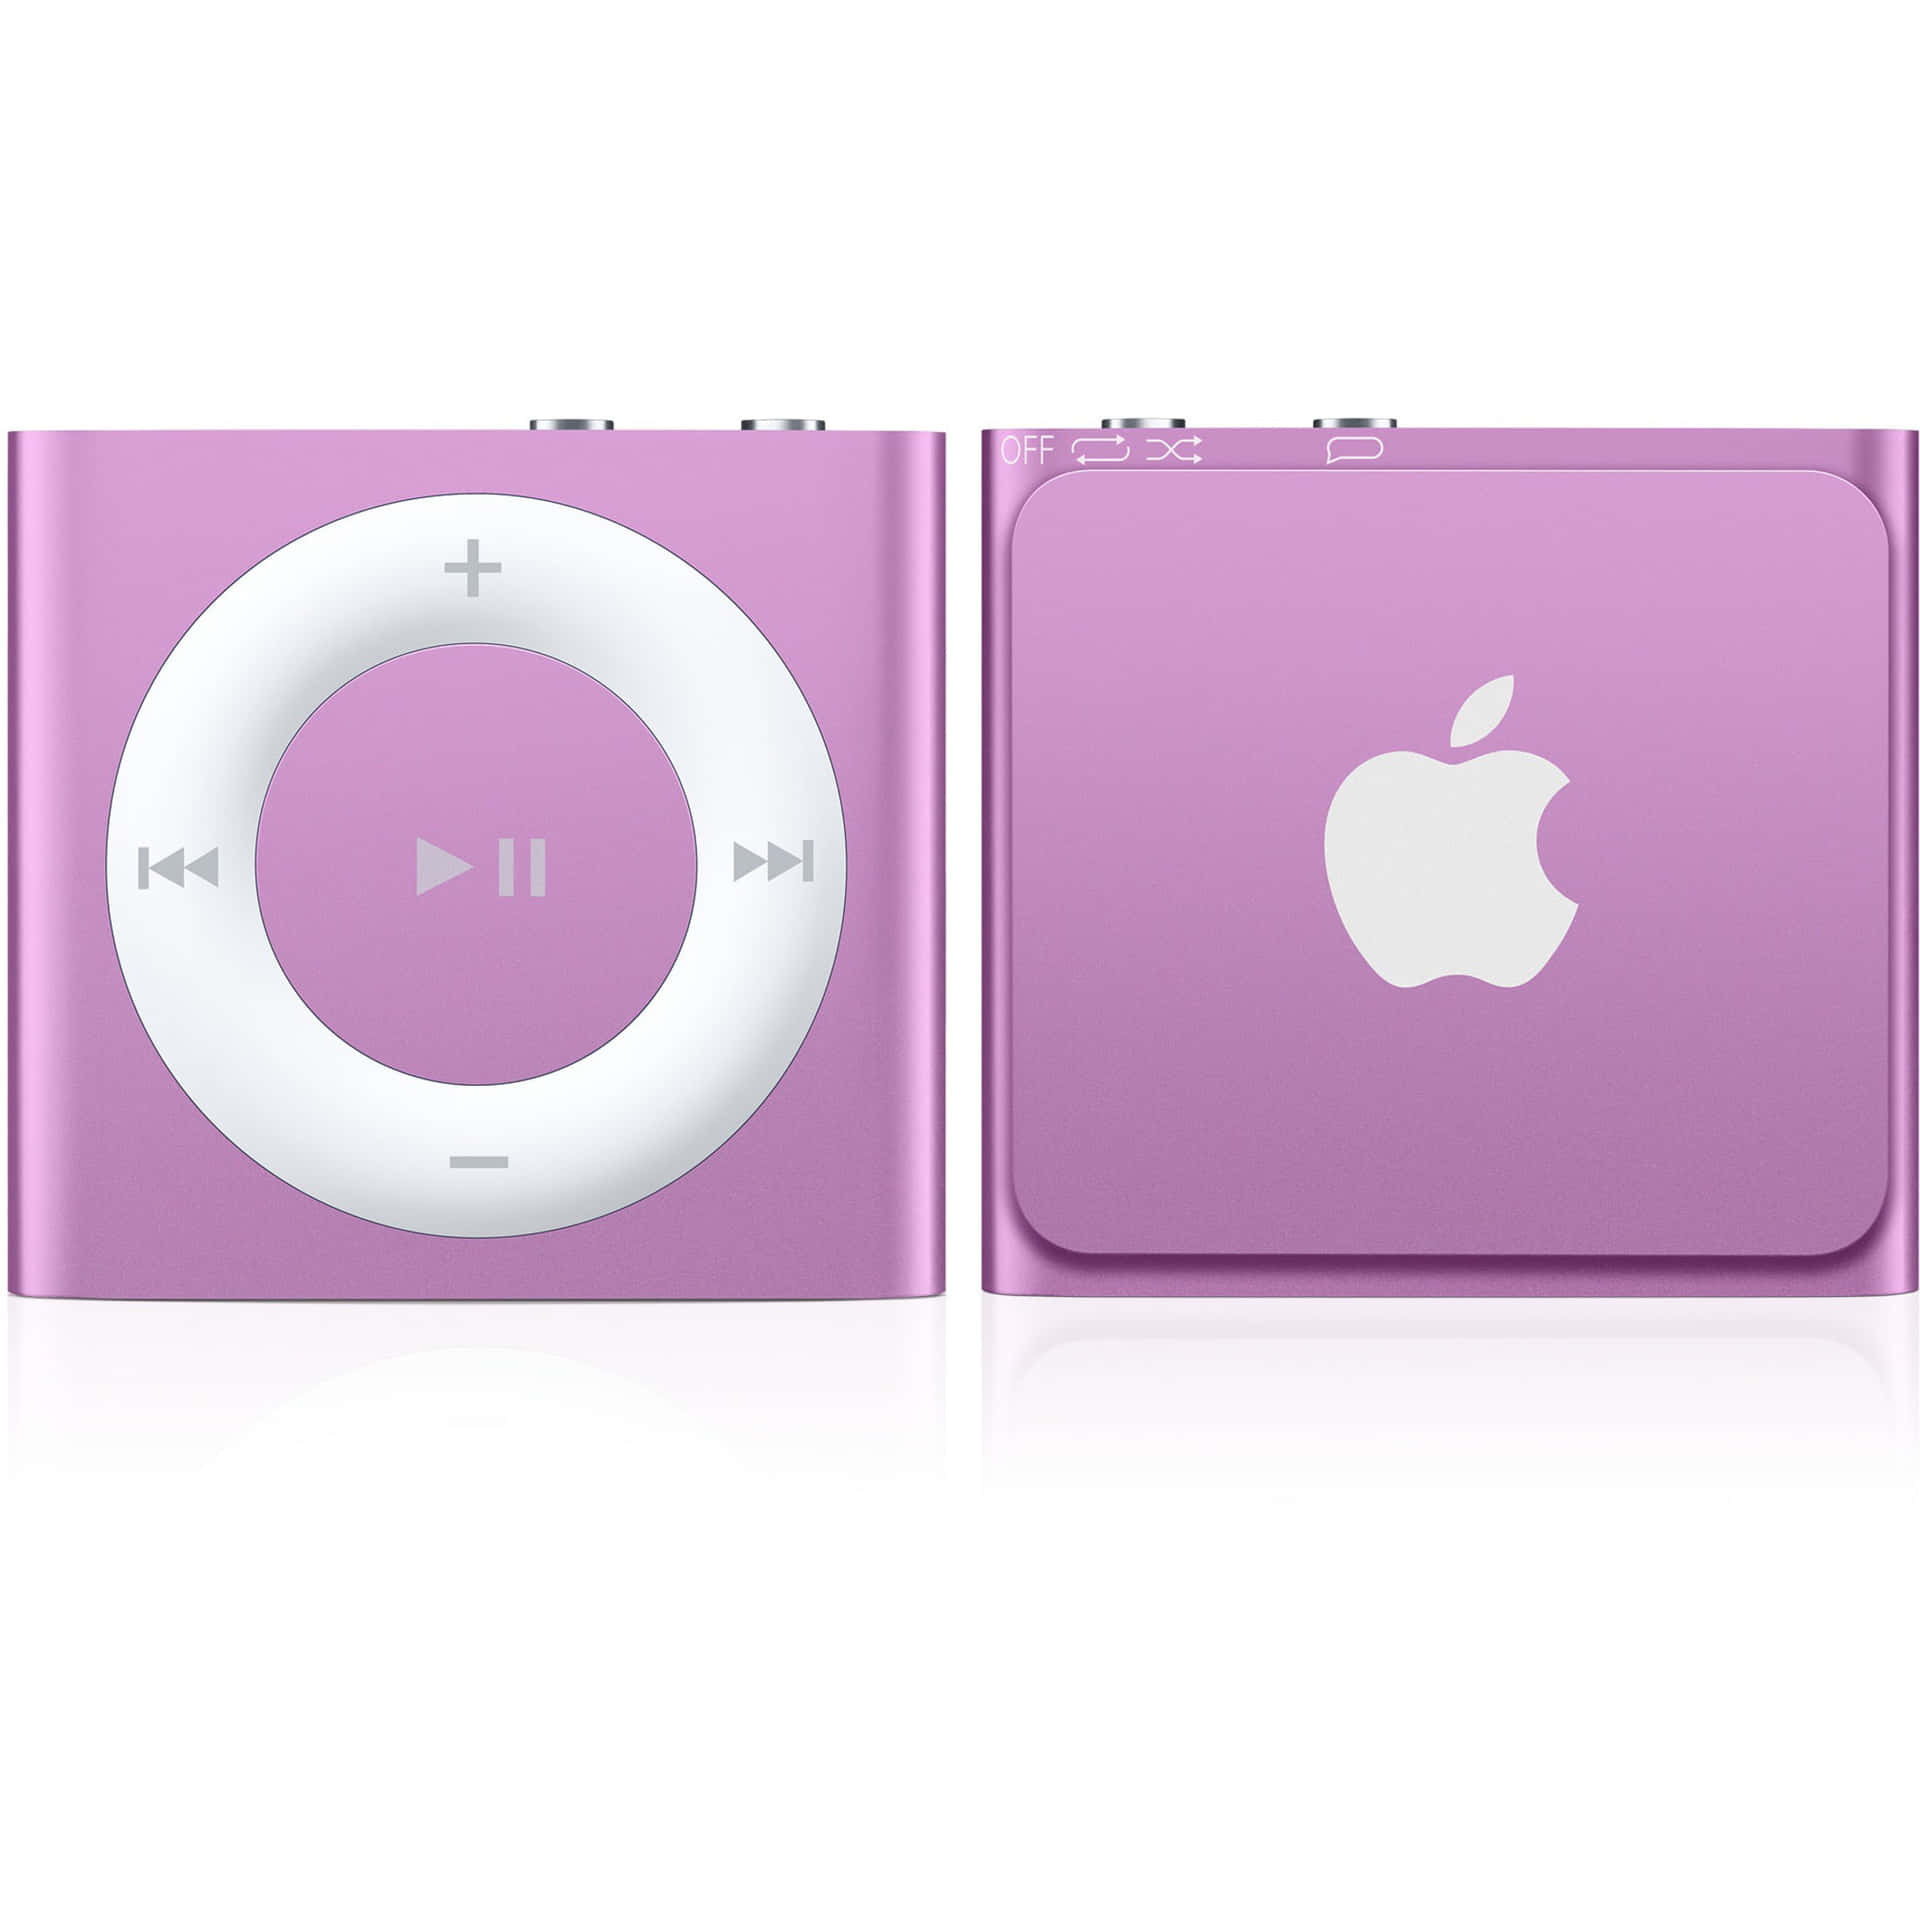 iPod Shuffle Mp3 Pictures